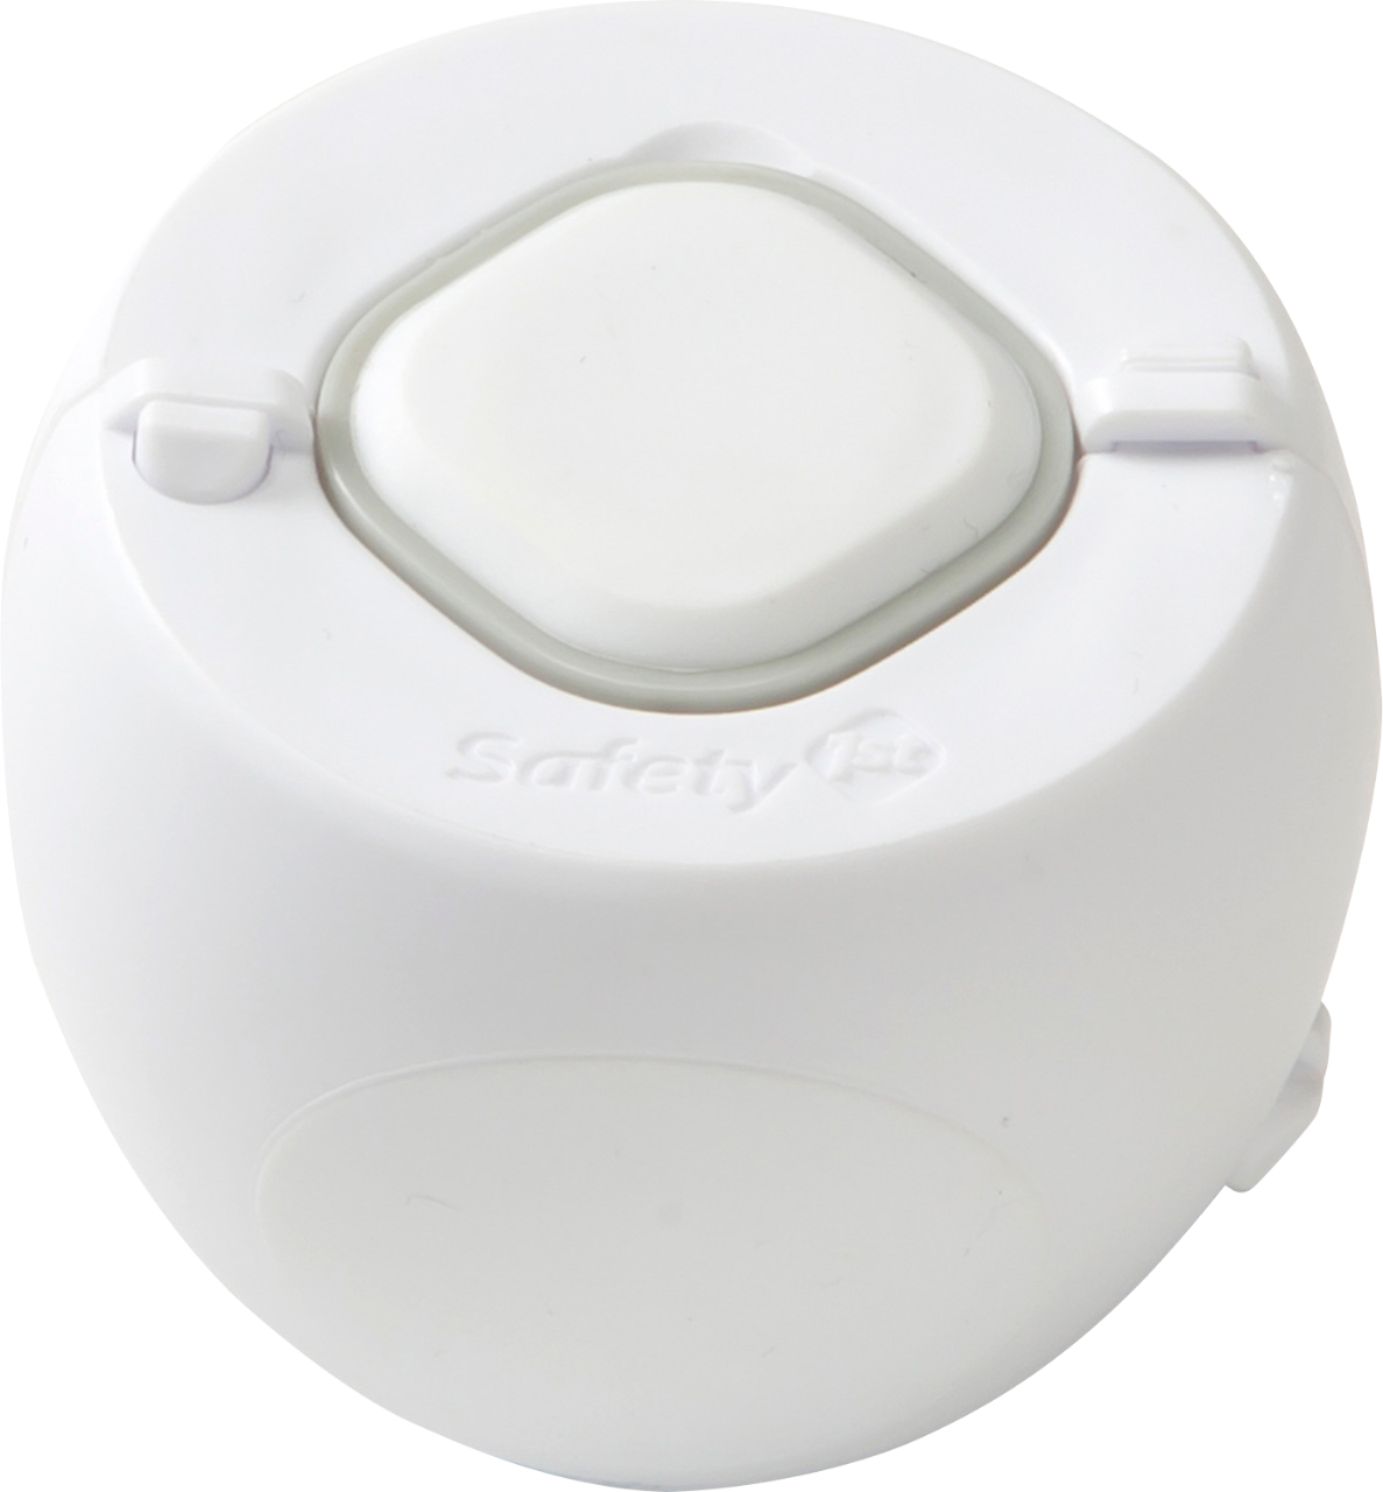 Angle View: Safety 1ˢᵗ OutSmart Toilet Lock, White